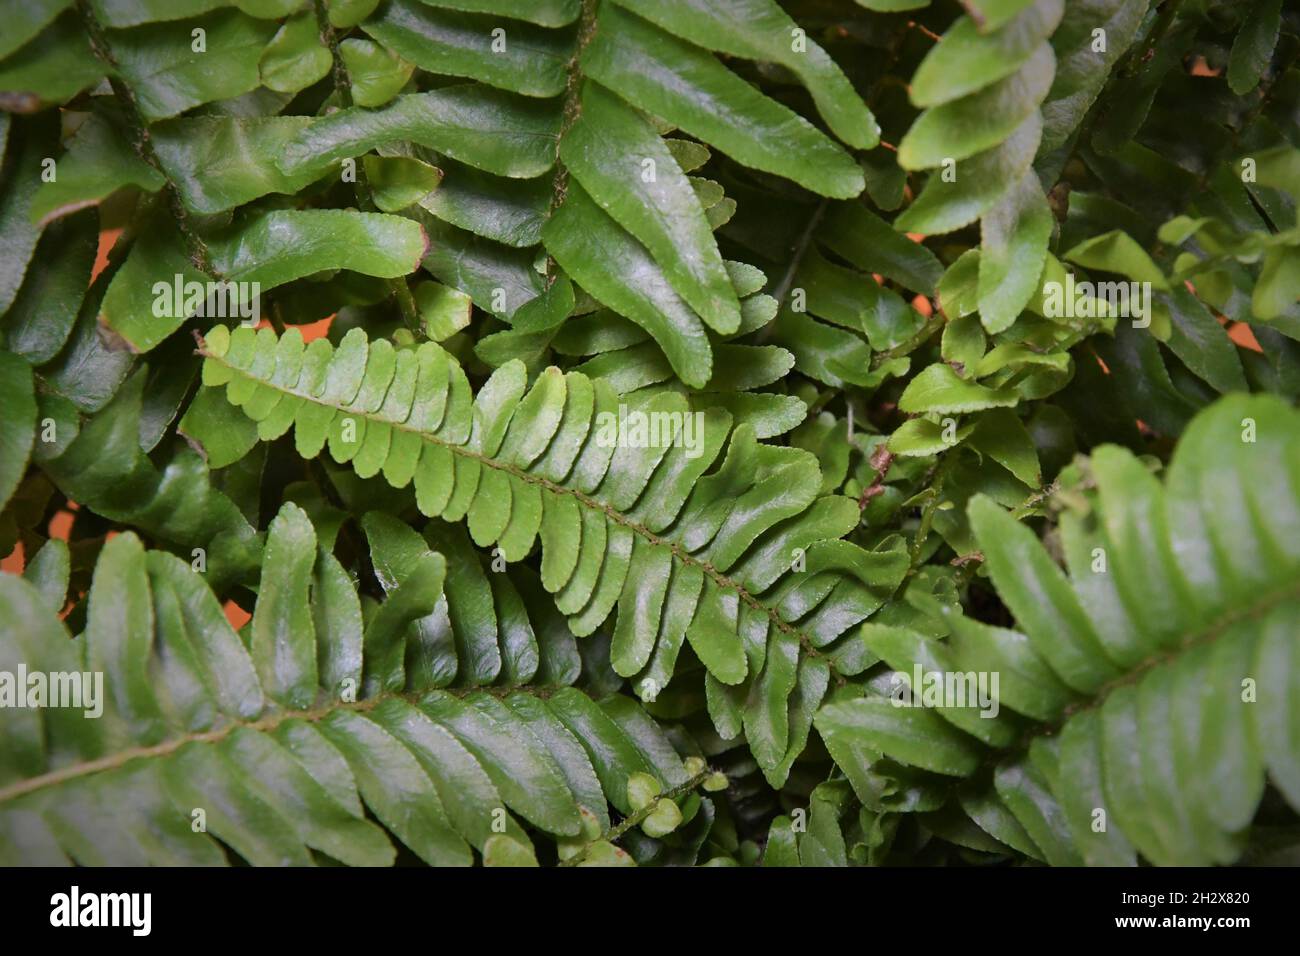 Close up of Nephrolepis exaltata houseplant, commonly known as a Boston fern. The image shows detail of the fern leaves or fronds, which are green. Stock Photo